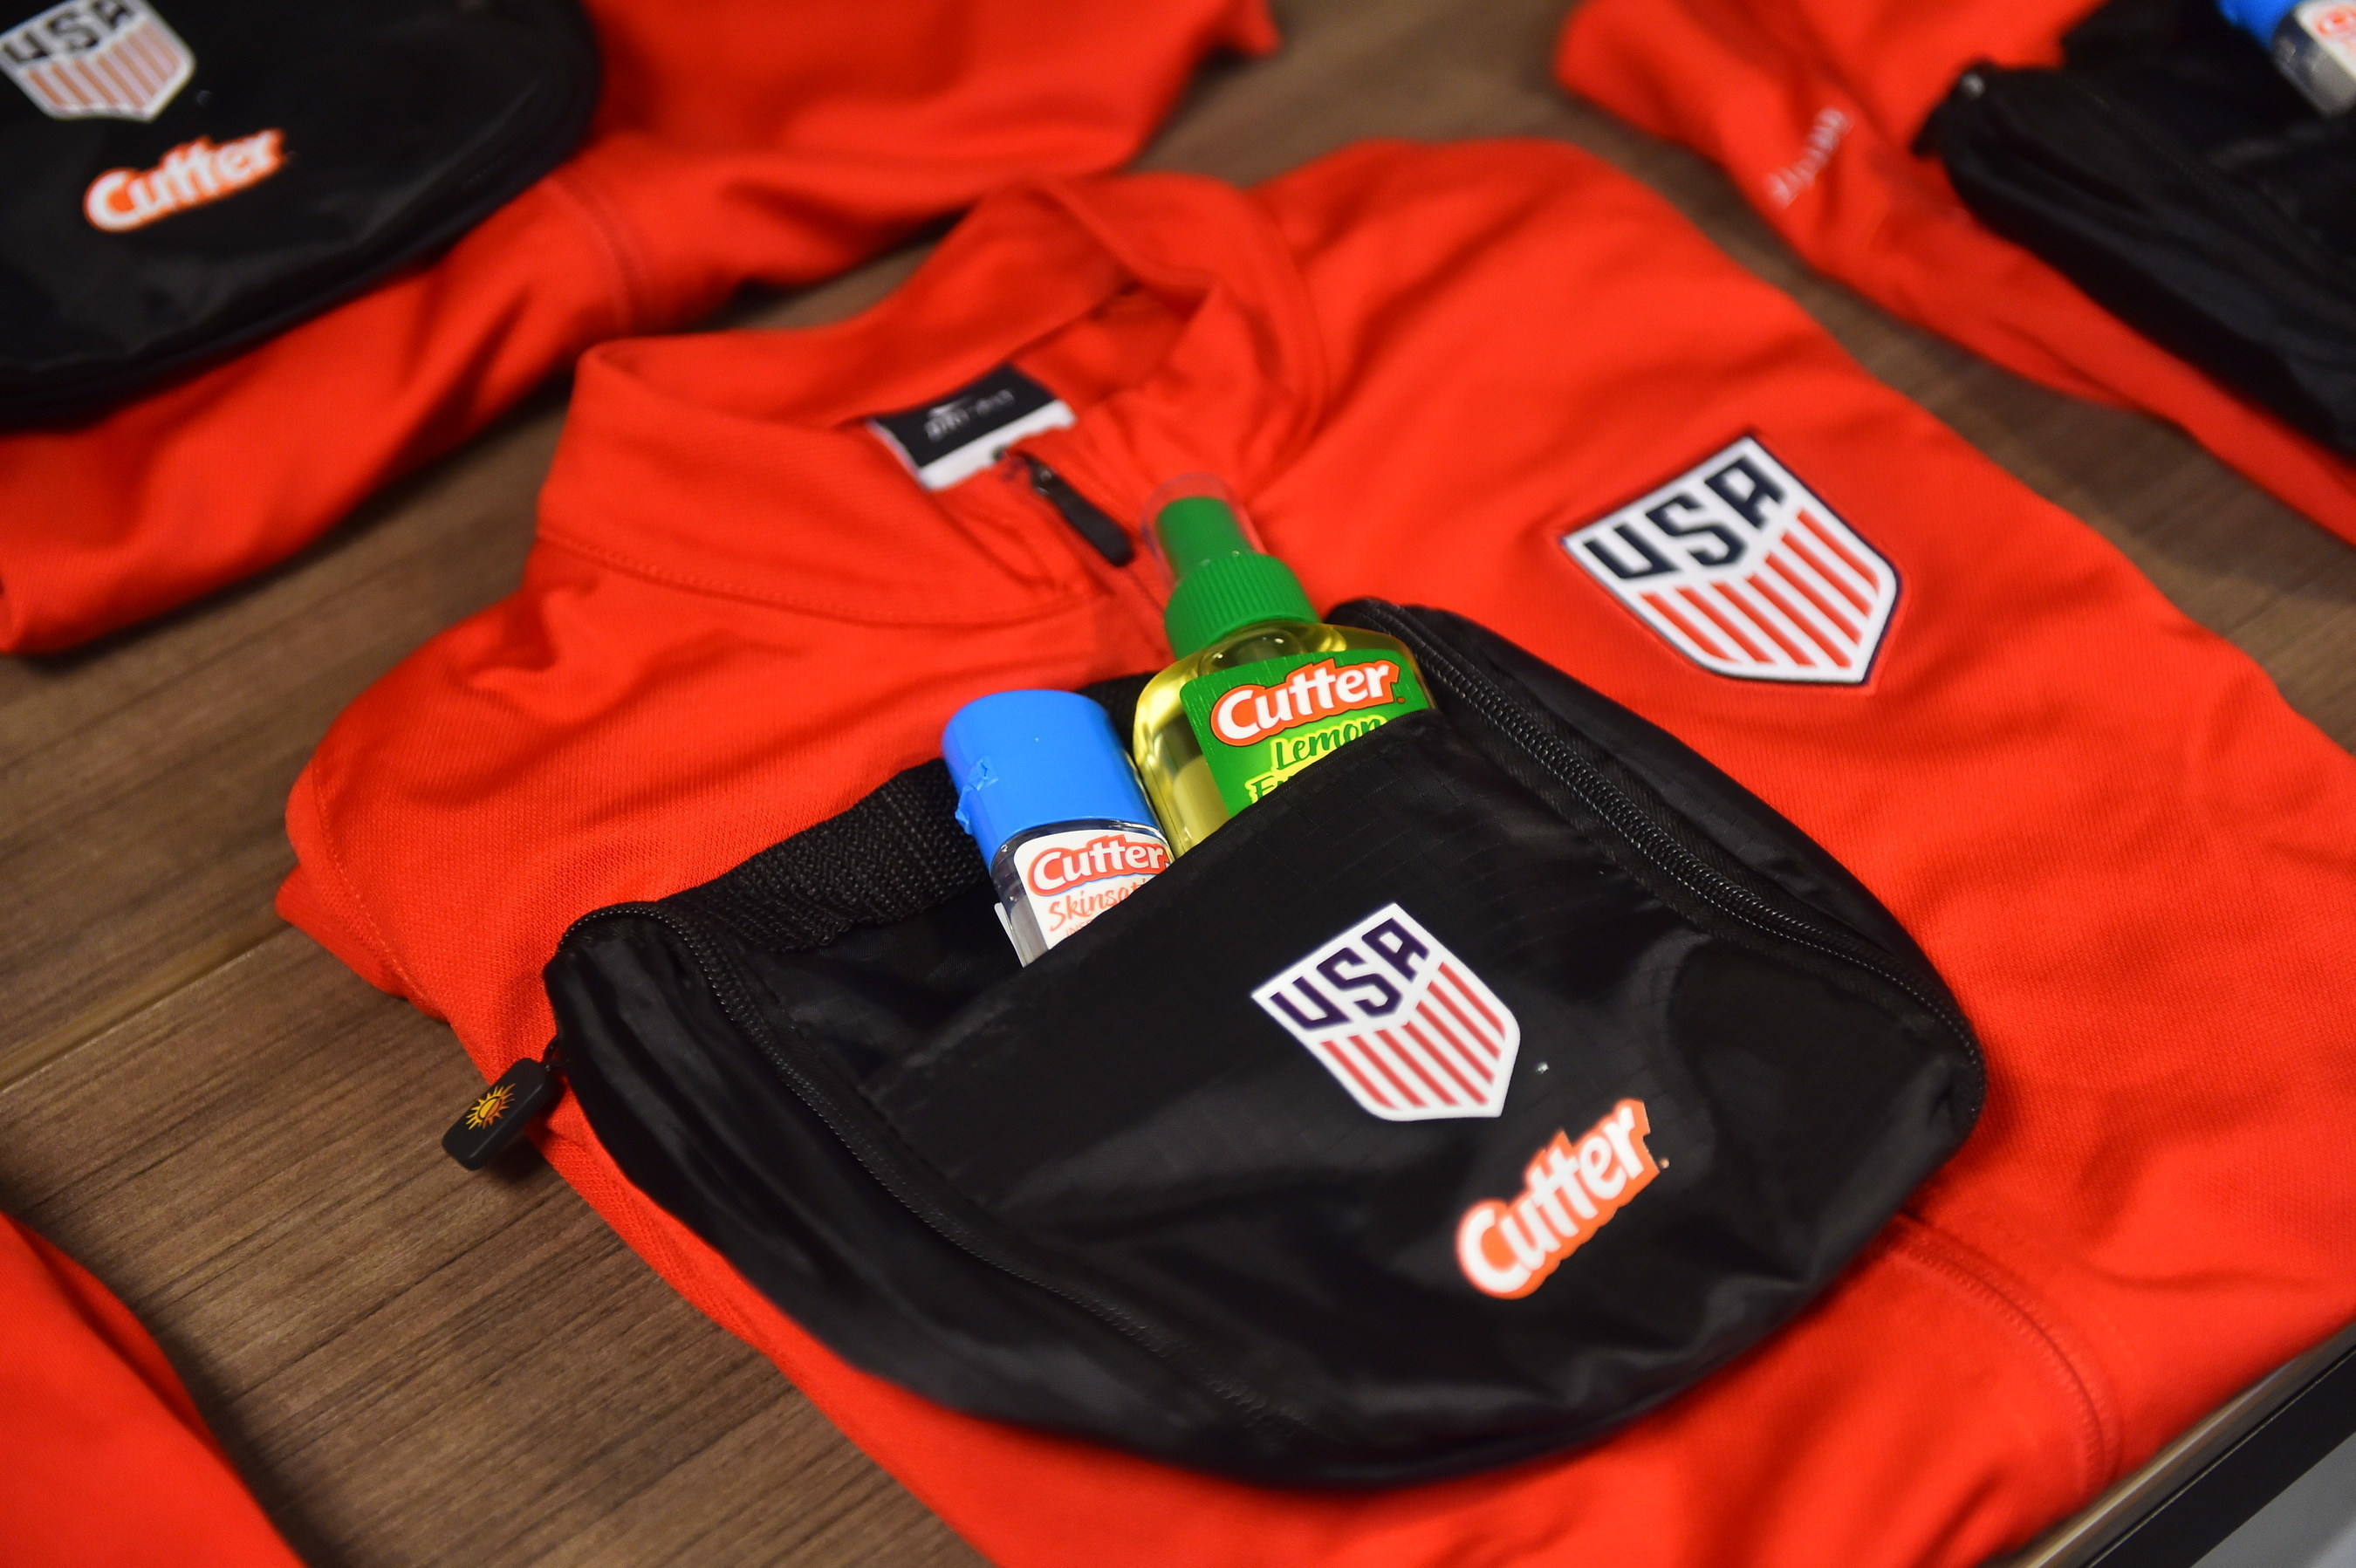 Cutter personal insect repellent kits were delivered to U.S. Soccer to help keep U.S. Women's National Team players heading to Rio and other Men's and Women's National Team players at all ages traveling across the world safe from mosquitoes.